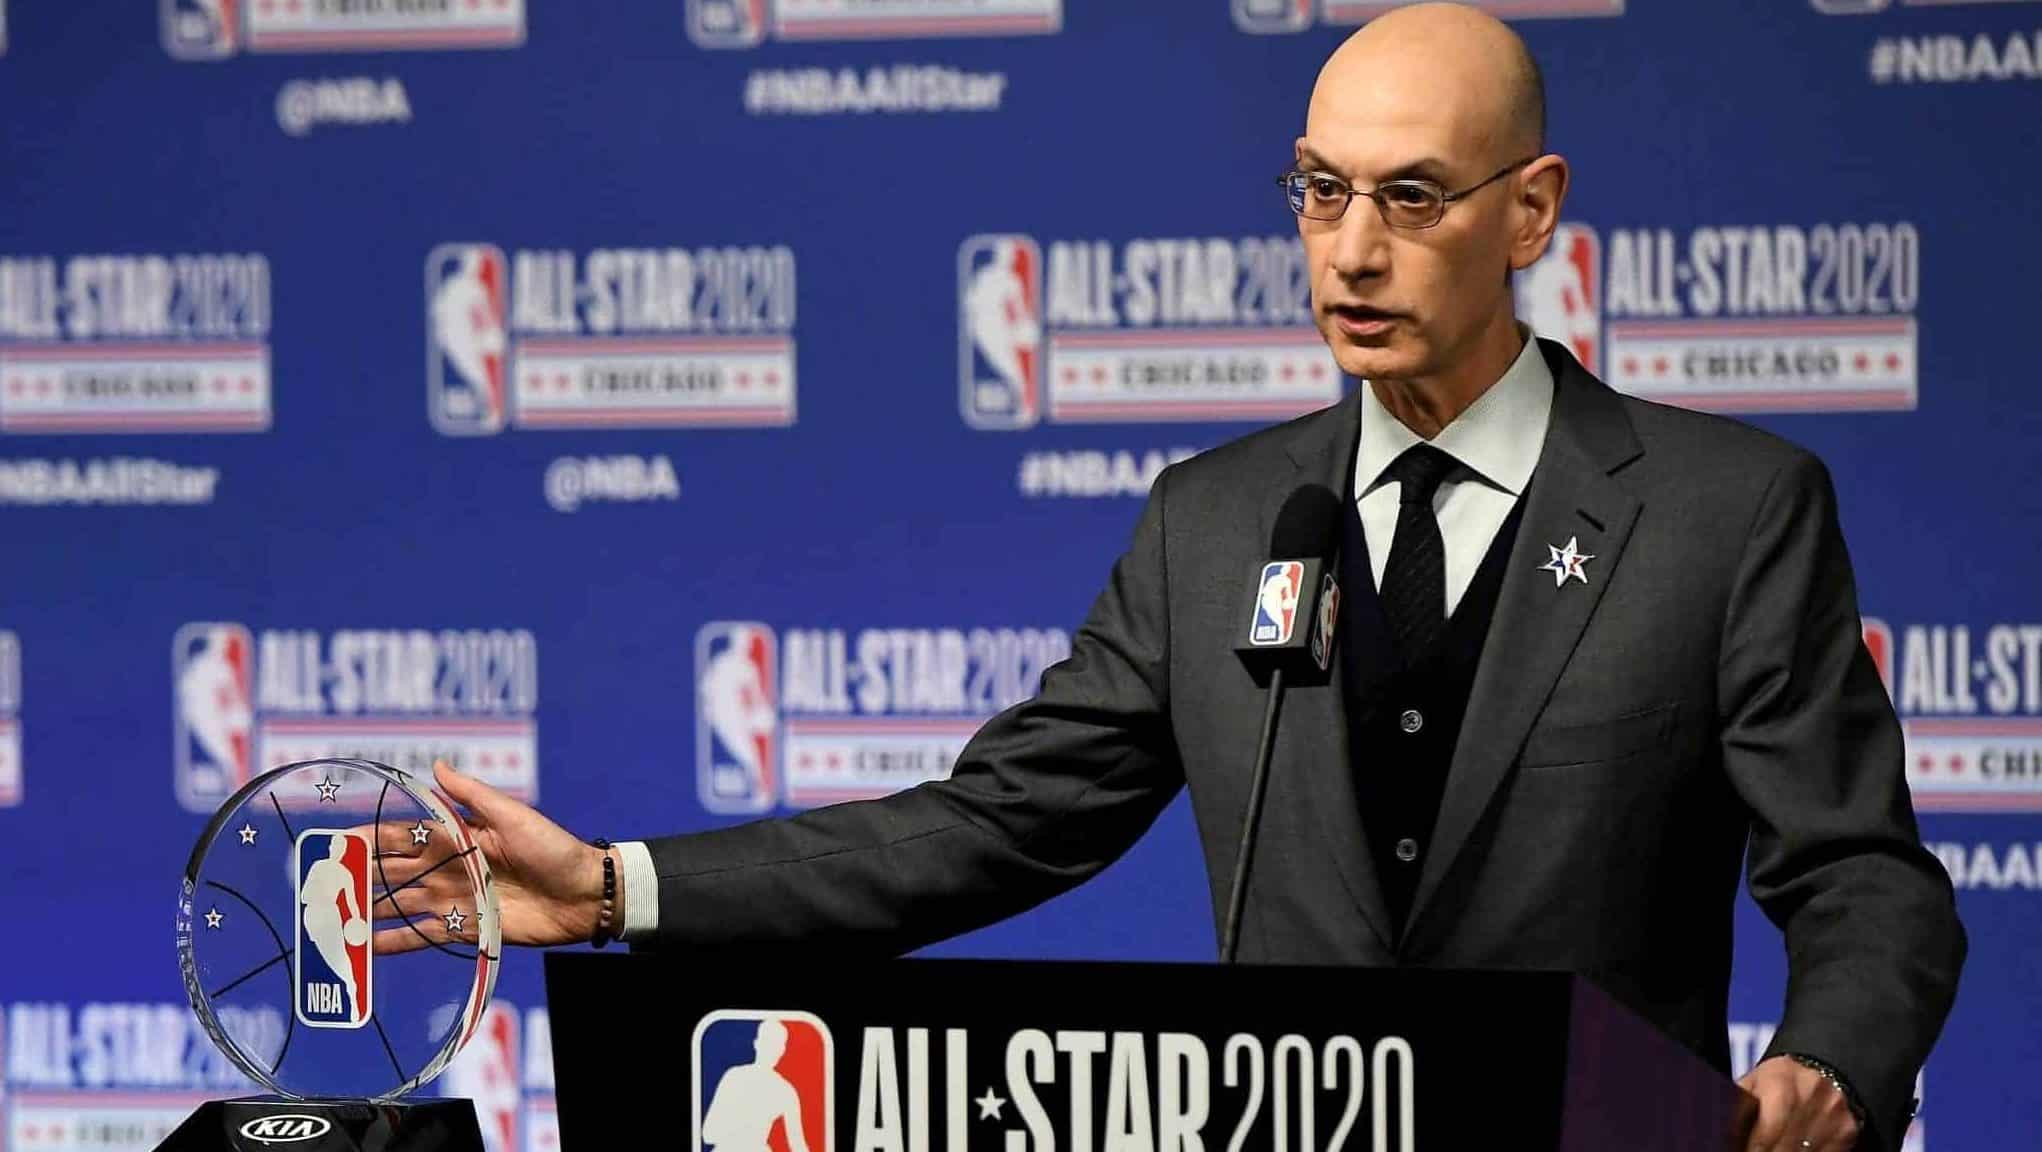 CHICAGO, ILLINOIS - FEBRUARY 15: NBA Commissioner Adam Silver speaks to the media during a press conference at the United Center on February 15, 2020 in Chicago, Illinois.